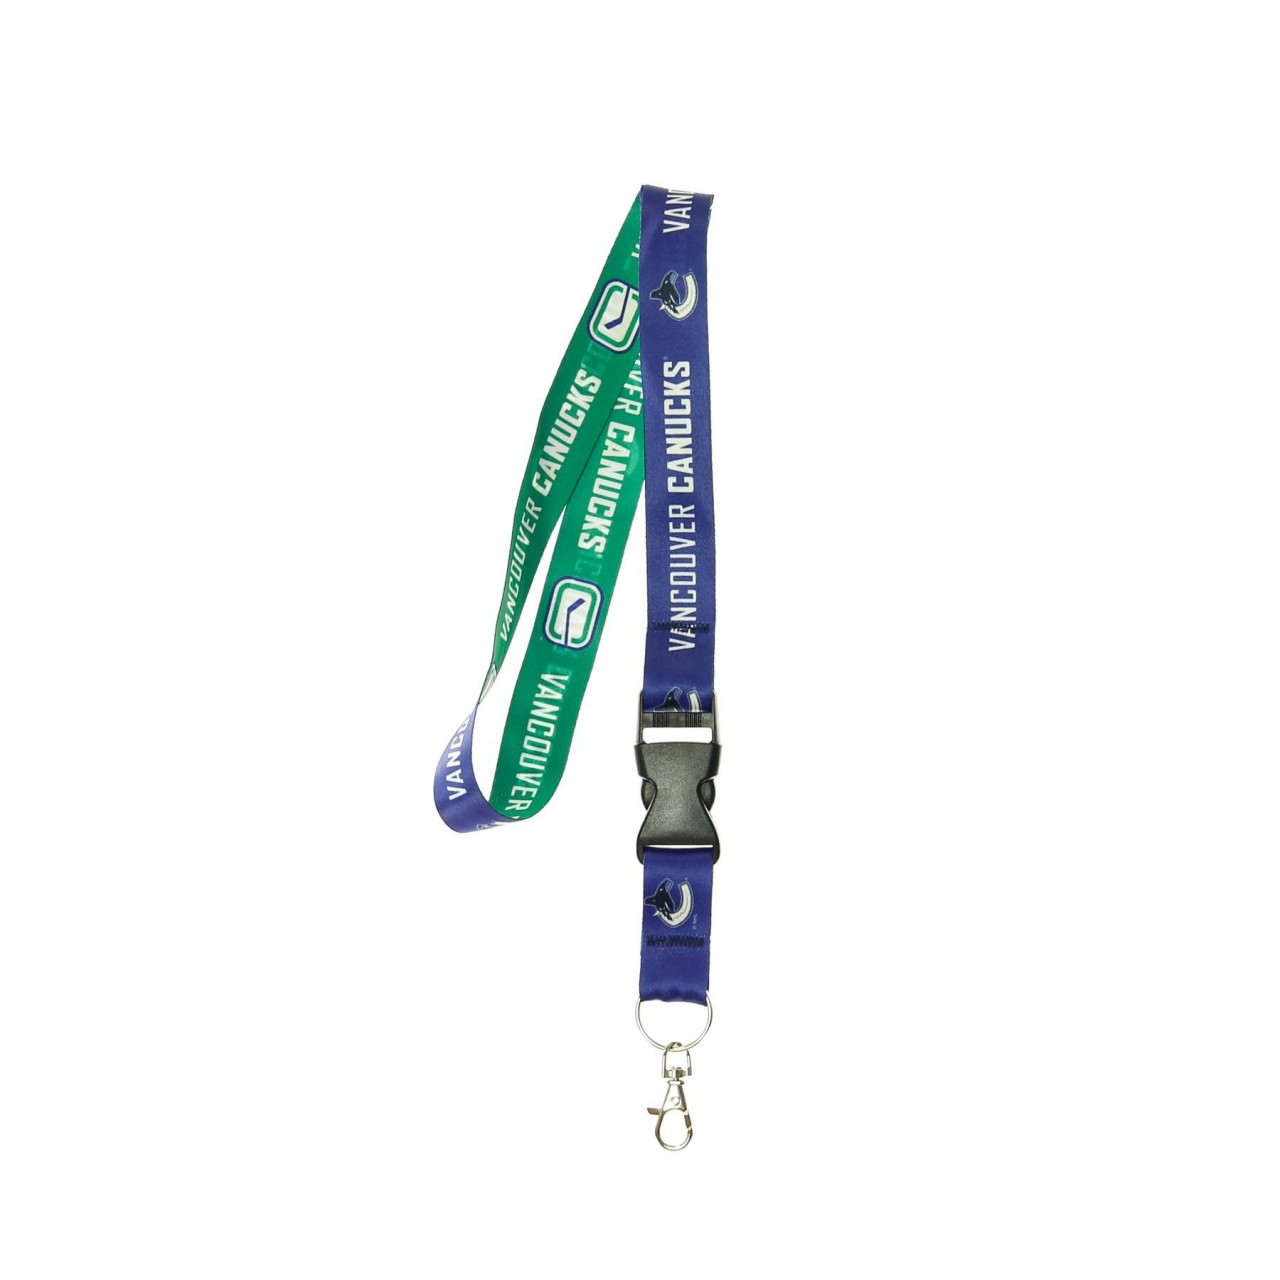 WINCRAFT NHL LANYARD WITH BUCKLE VANCAN 100032085620453